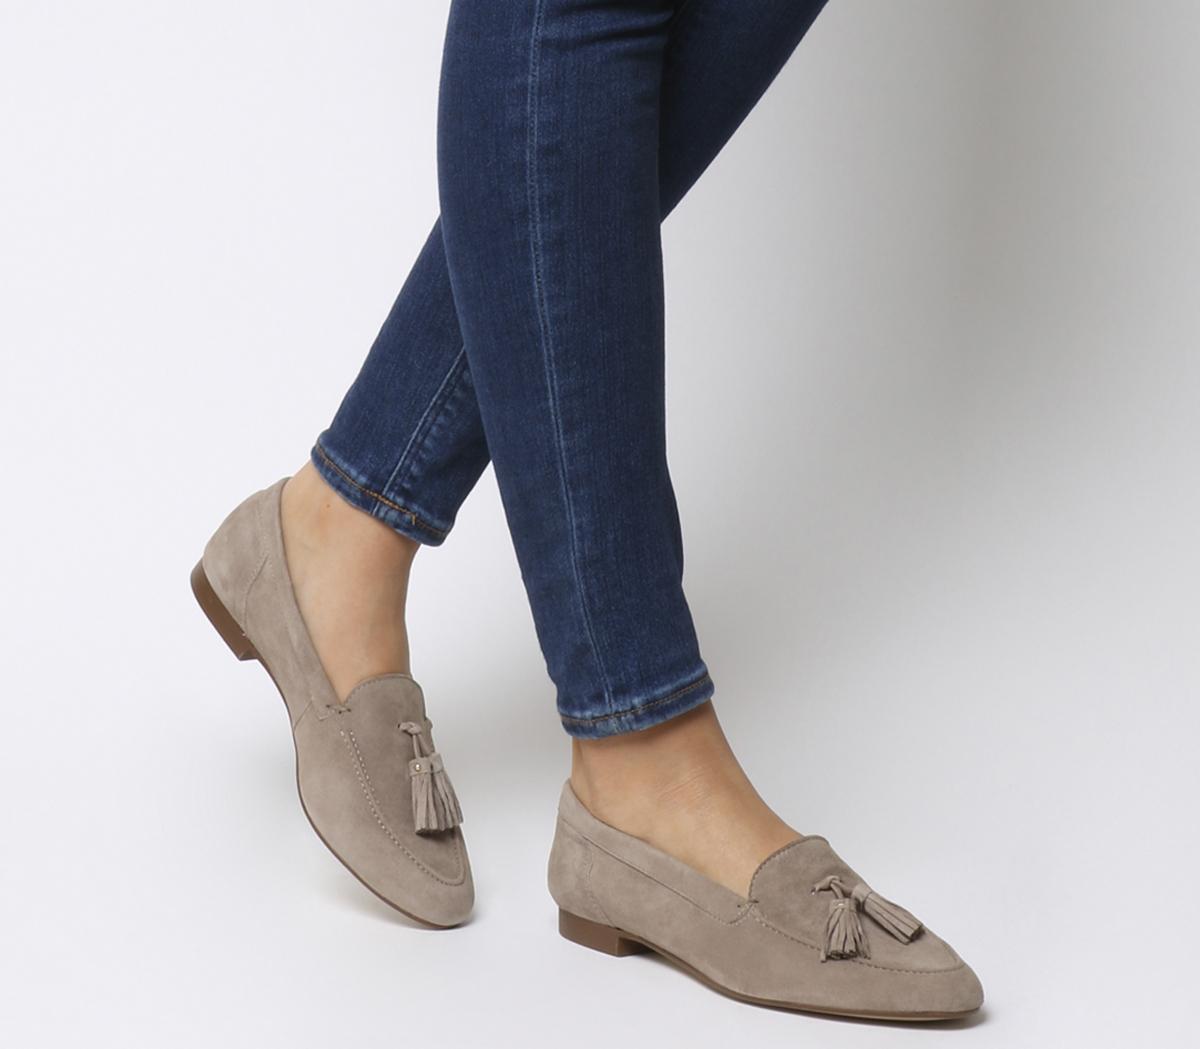 Office Retro Tassel Loafers Taupe Suede - Flat Shoes for Women